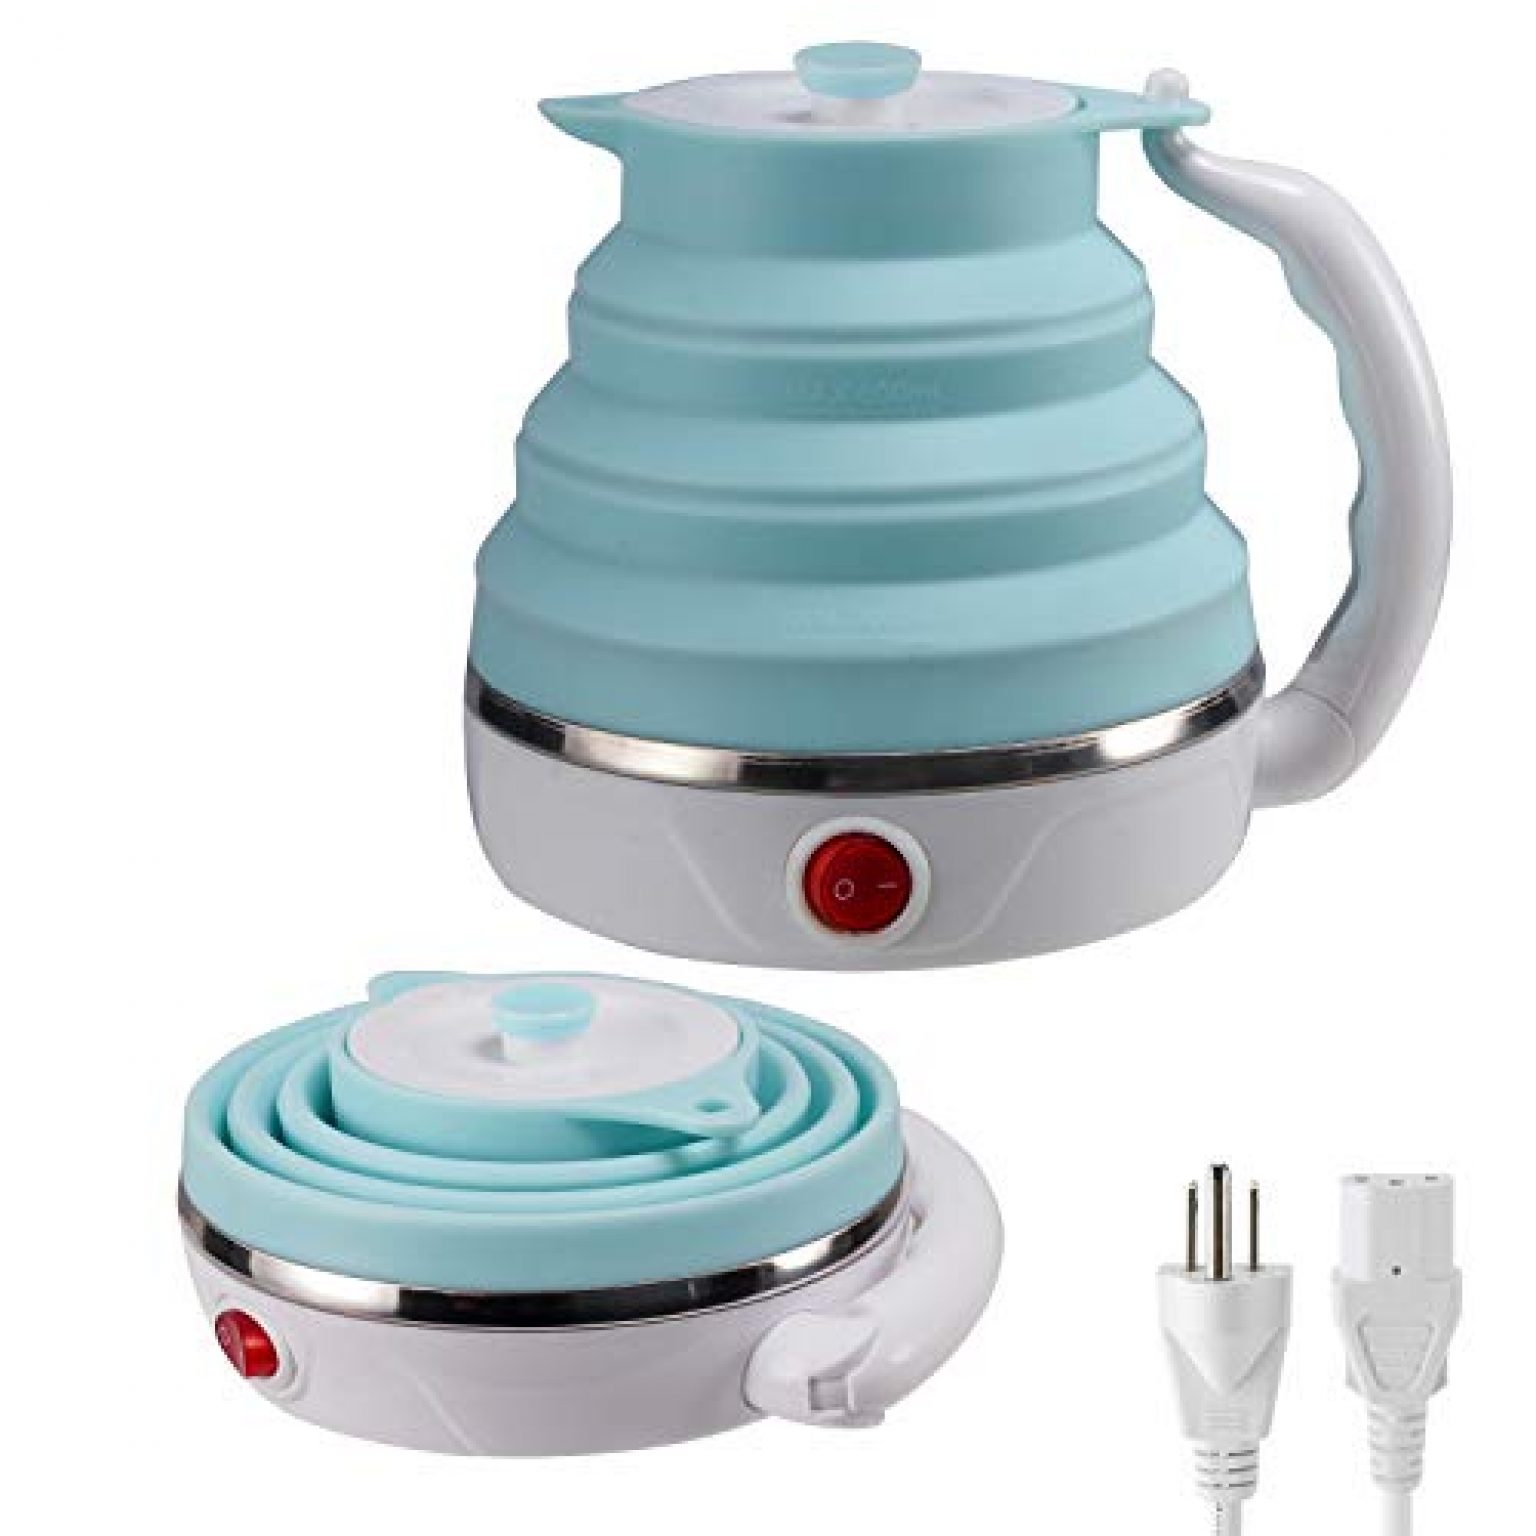 travel kettle non electric